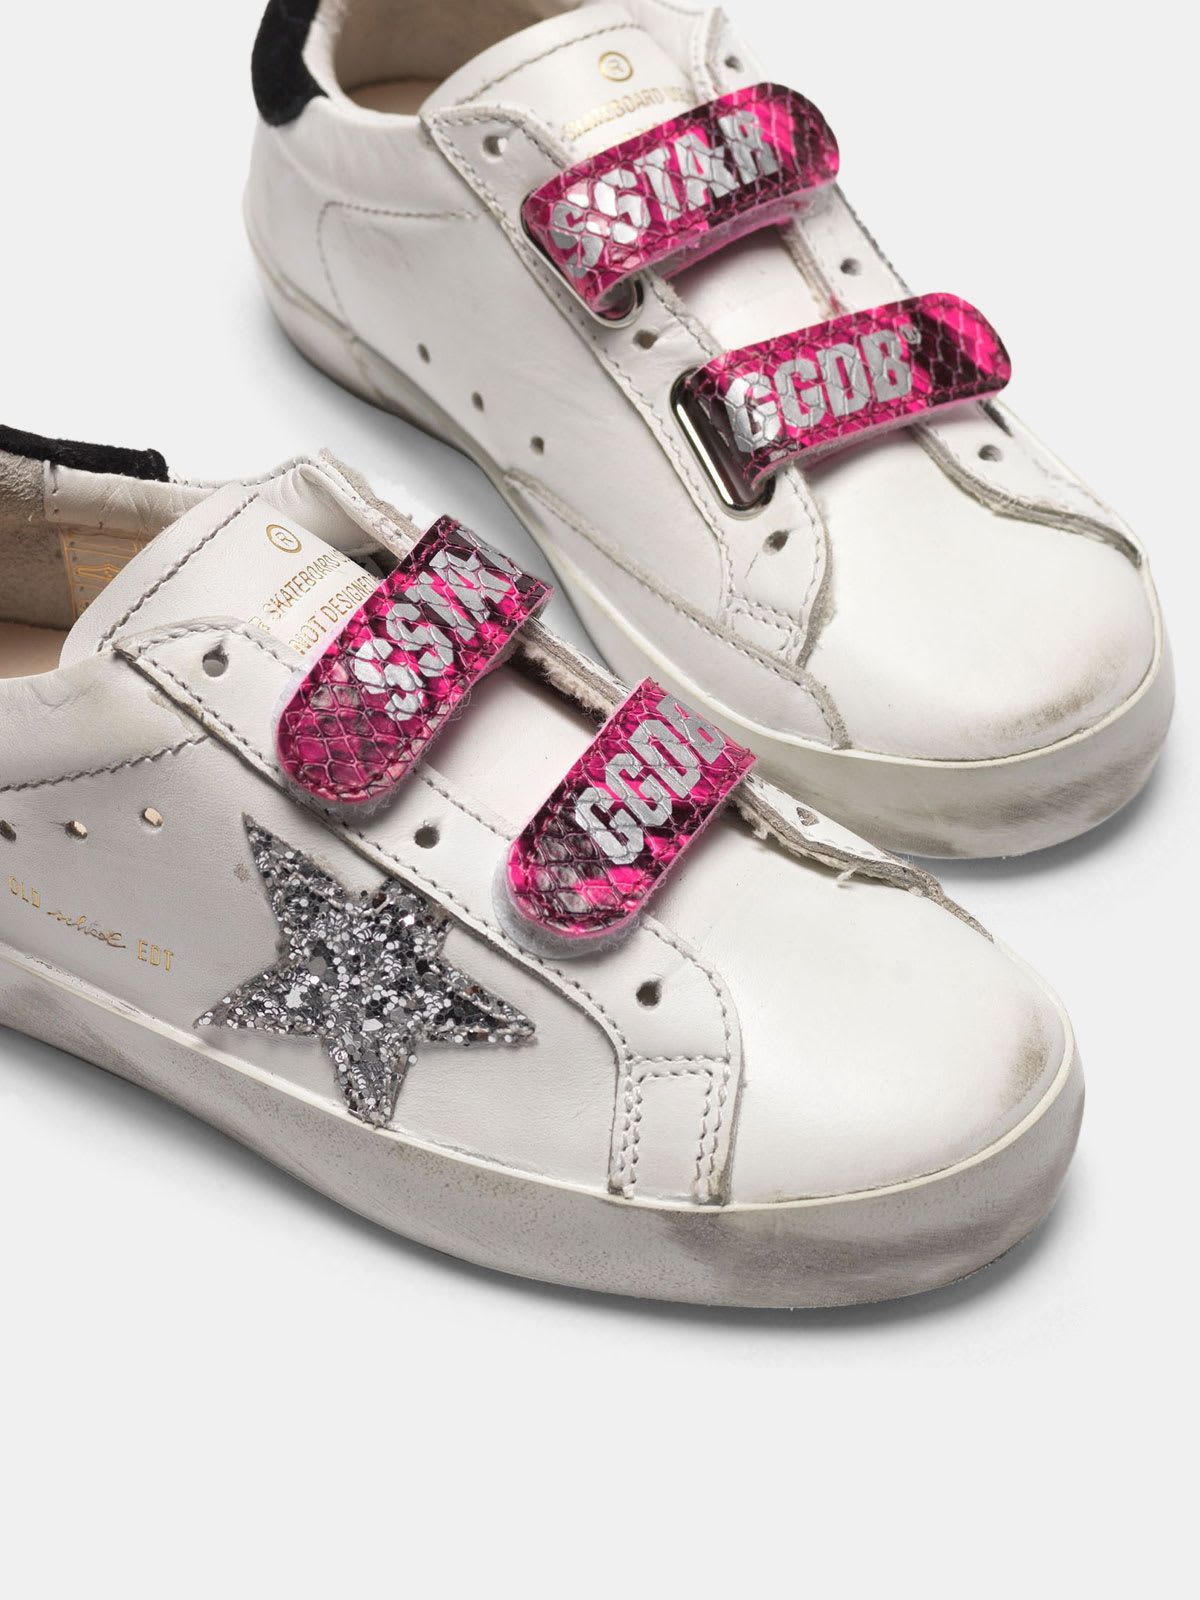 Old School sneakers with glittery star and fuchsia snakeskin-print heel tab